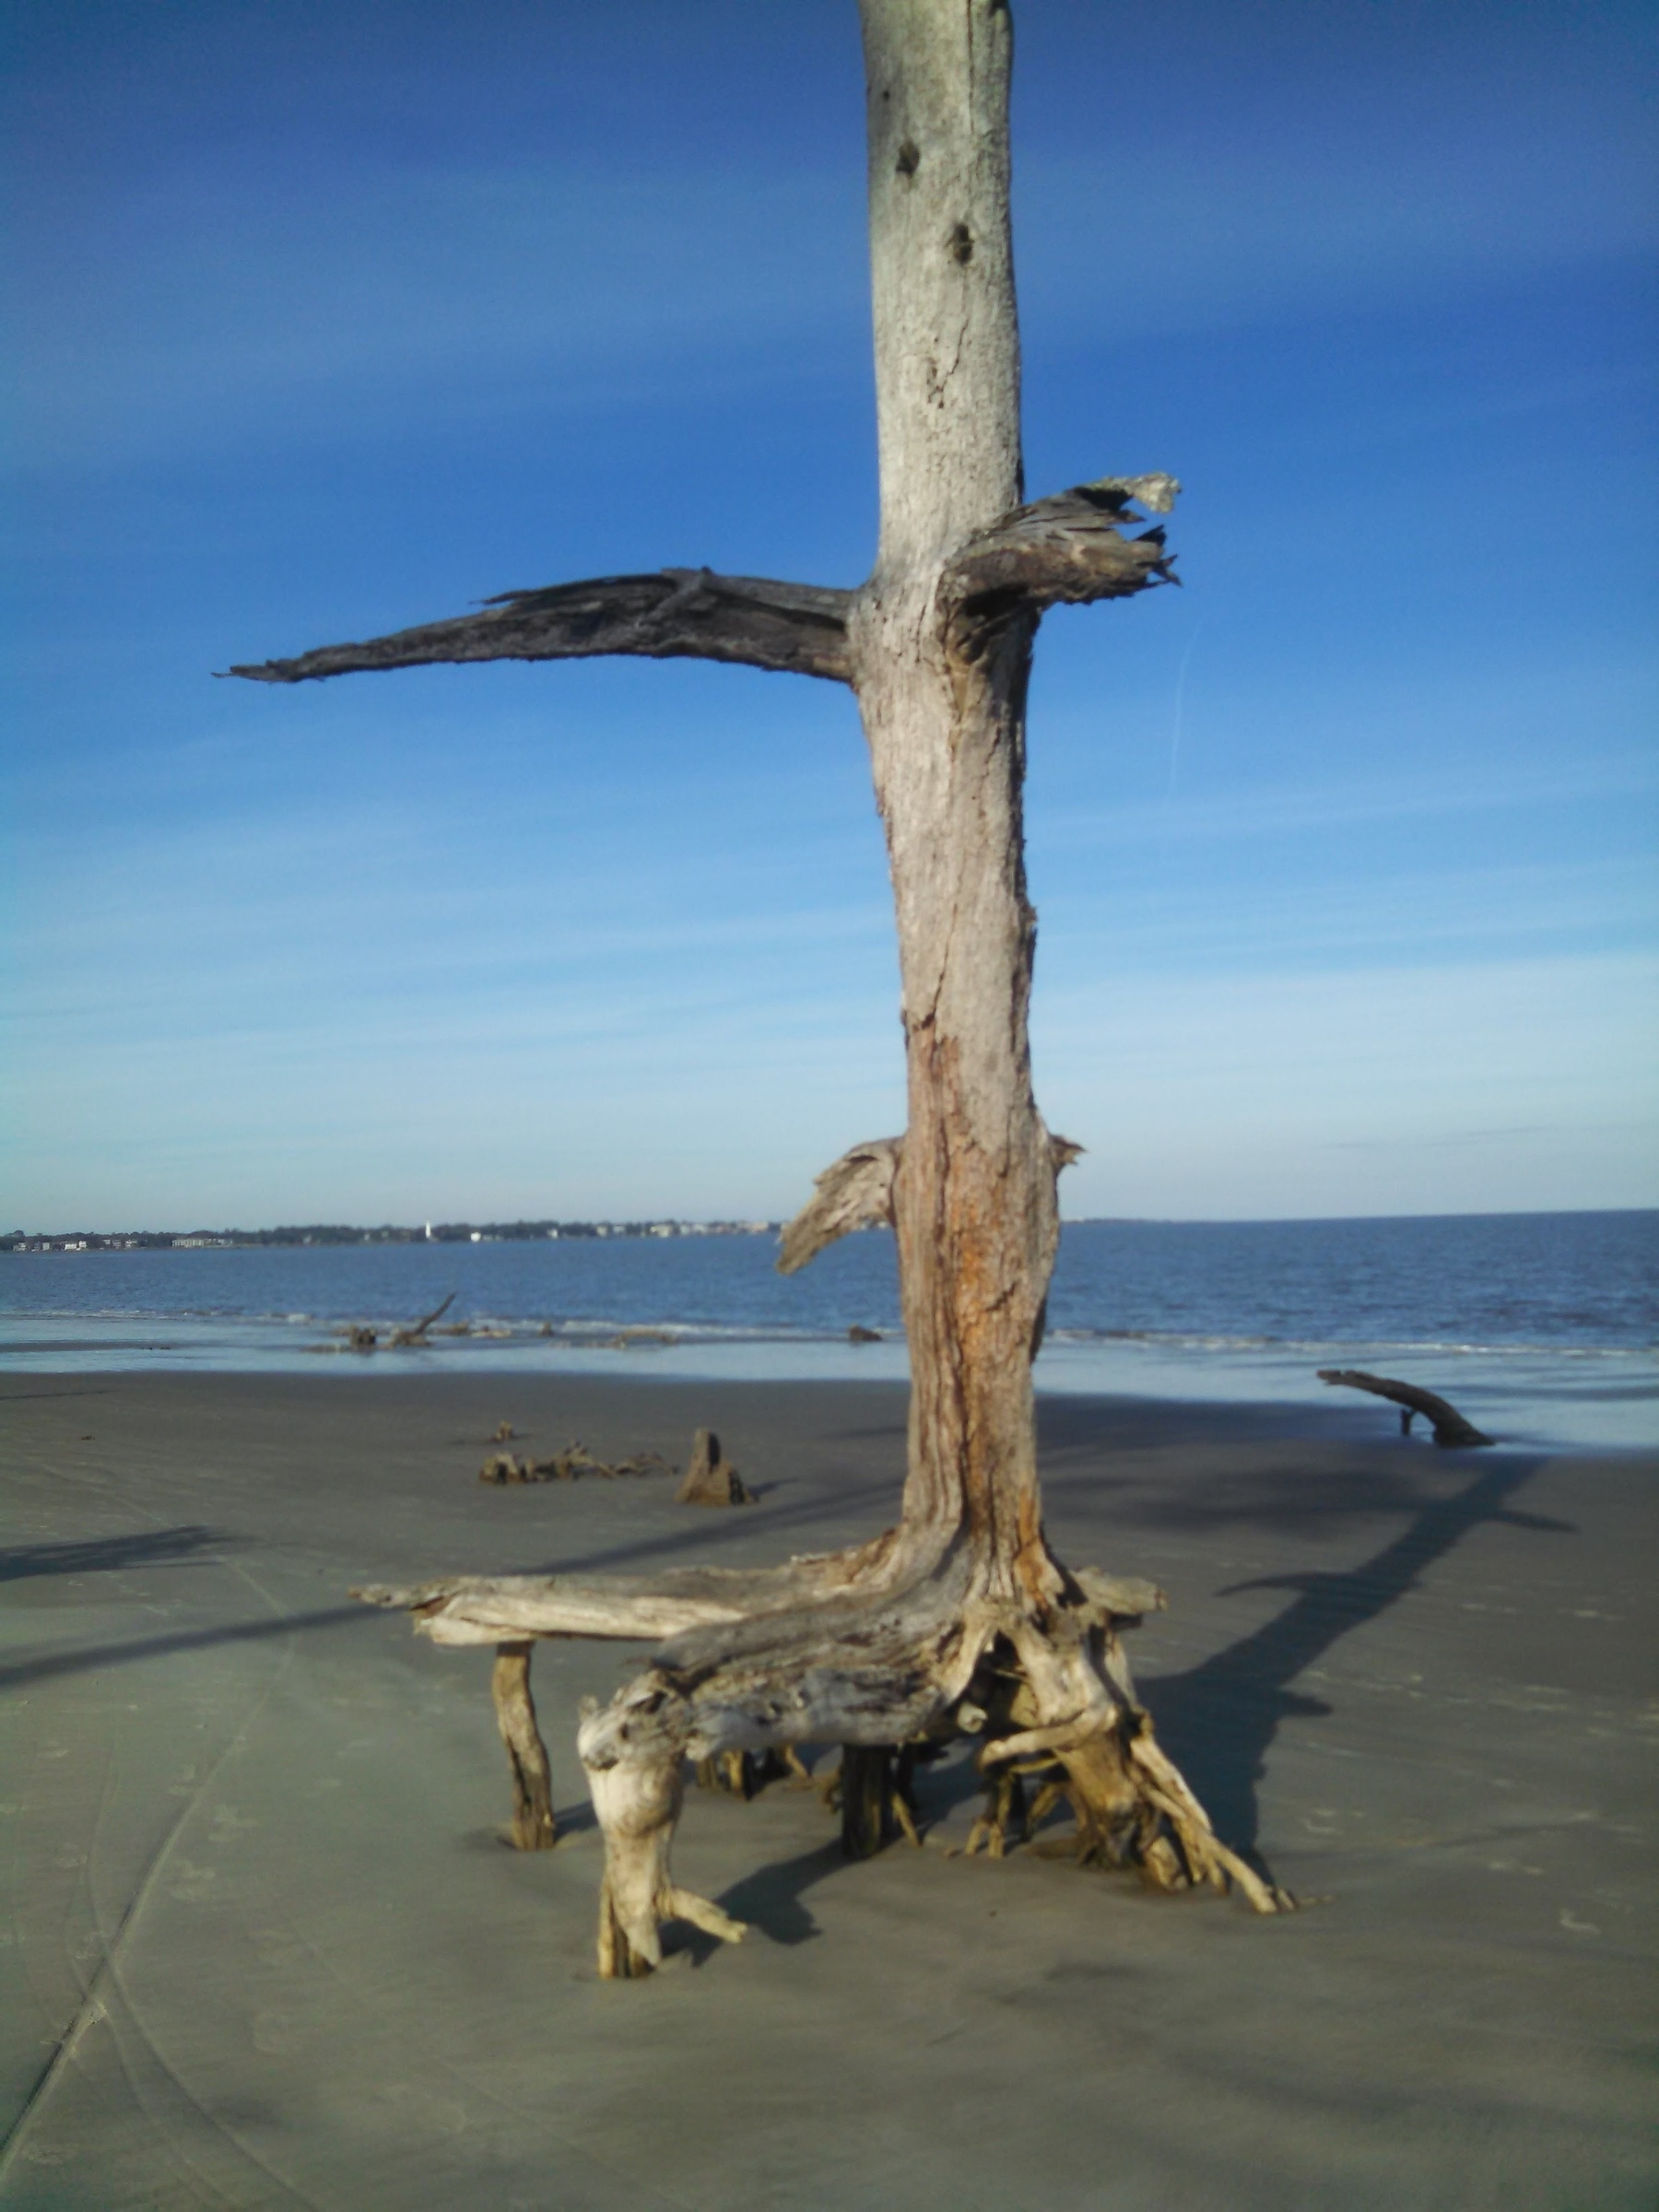 a battered driftwood tree standing on a beach with sea and sky horizon in background